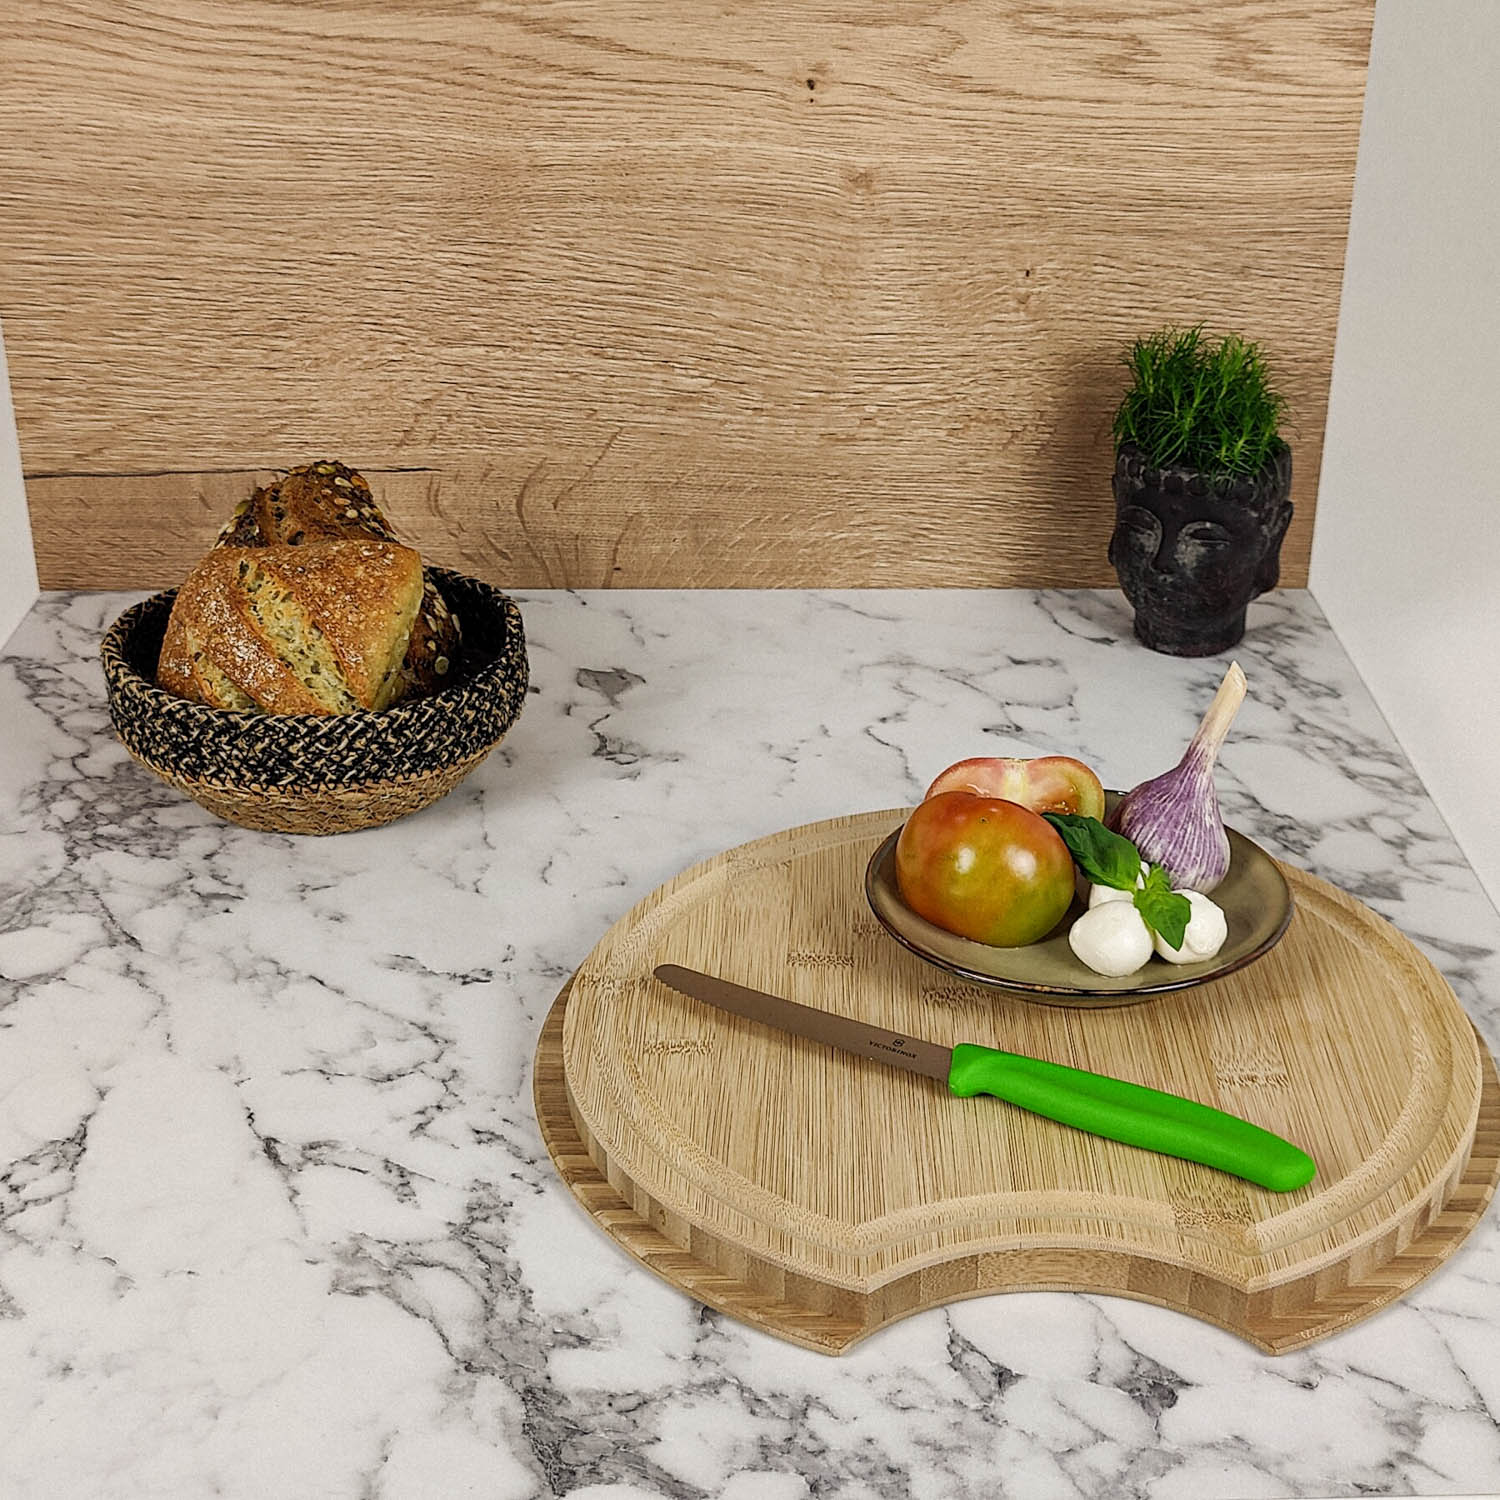 Cutting board with sink cover for Knaus models (round)